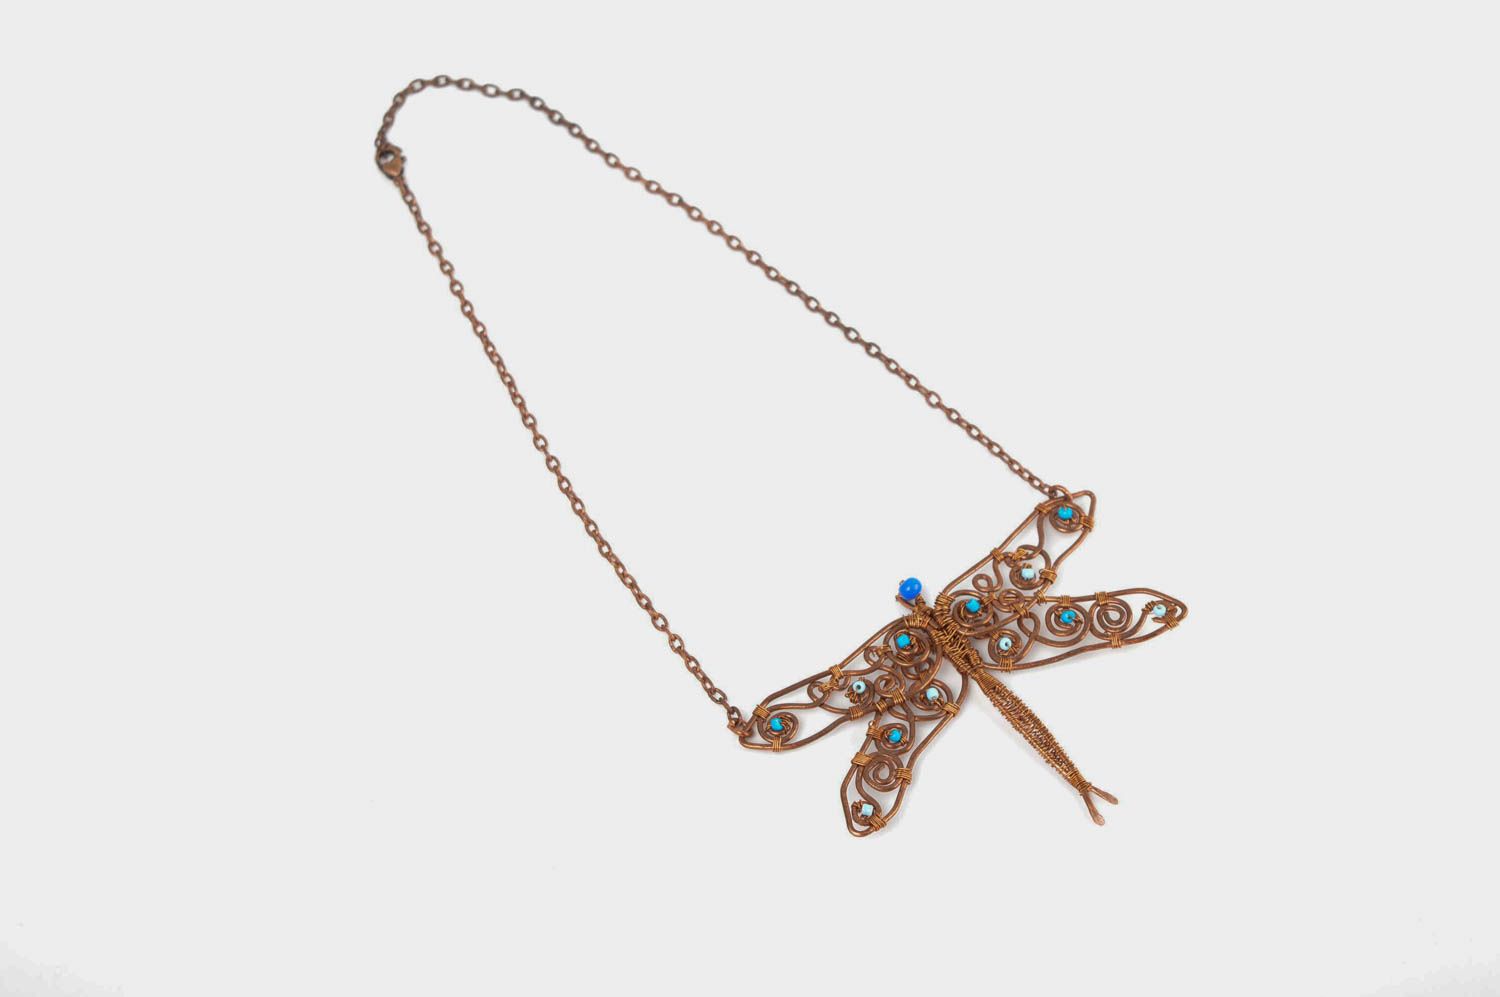 Handmade jewelry metal necklace copper pendant necklace dragonfly pendant photo 3